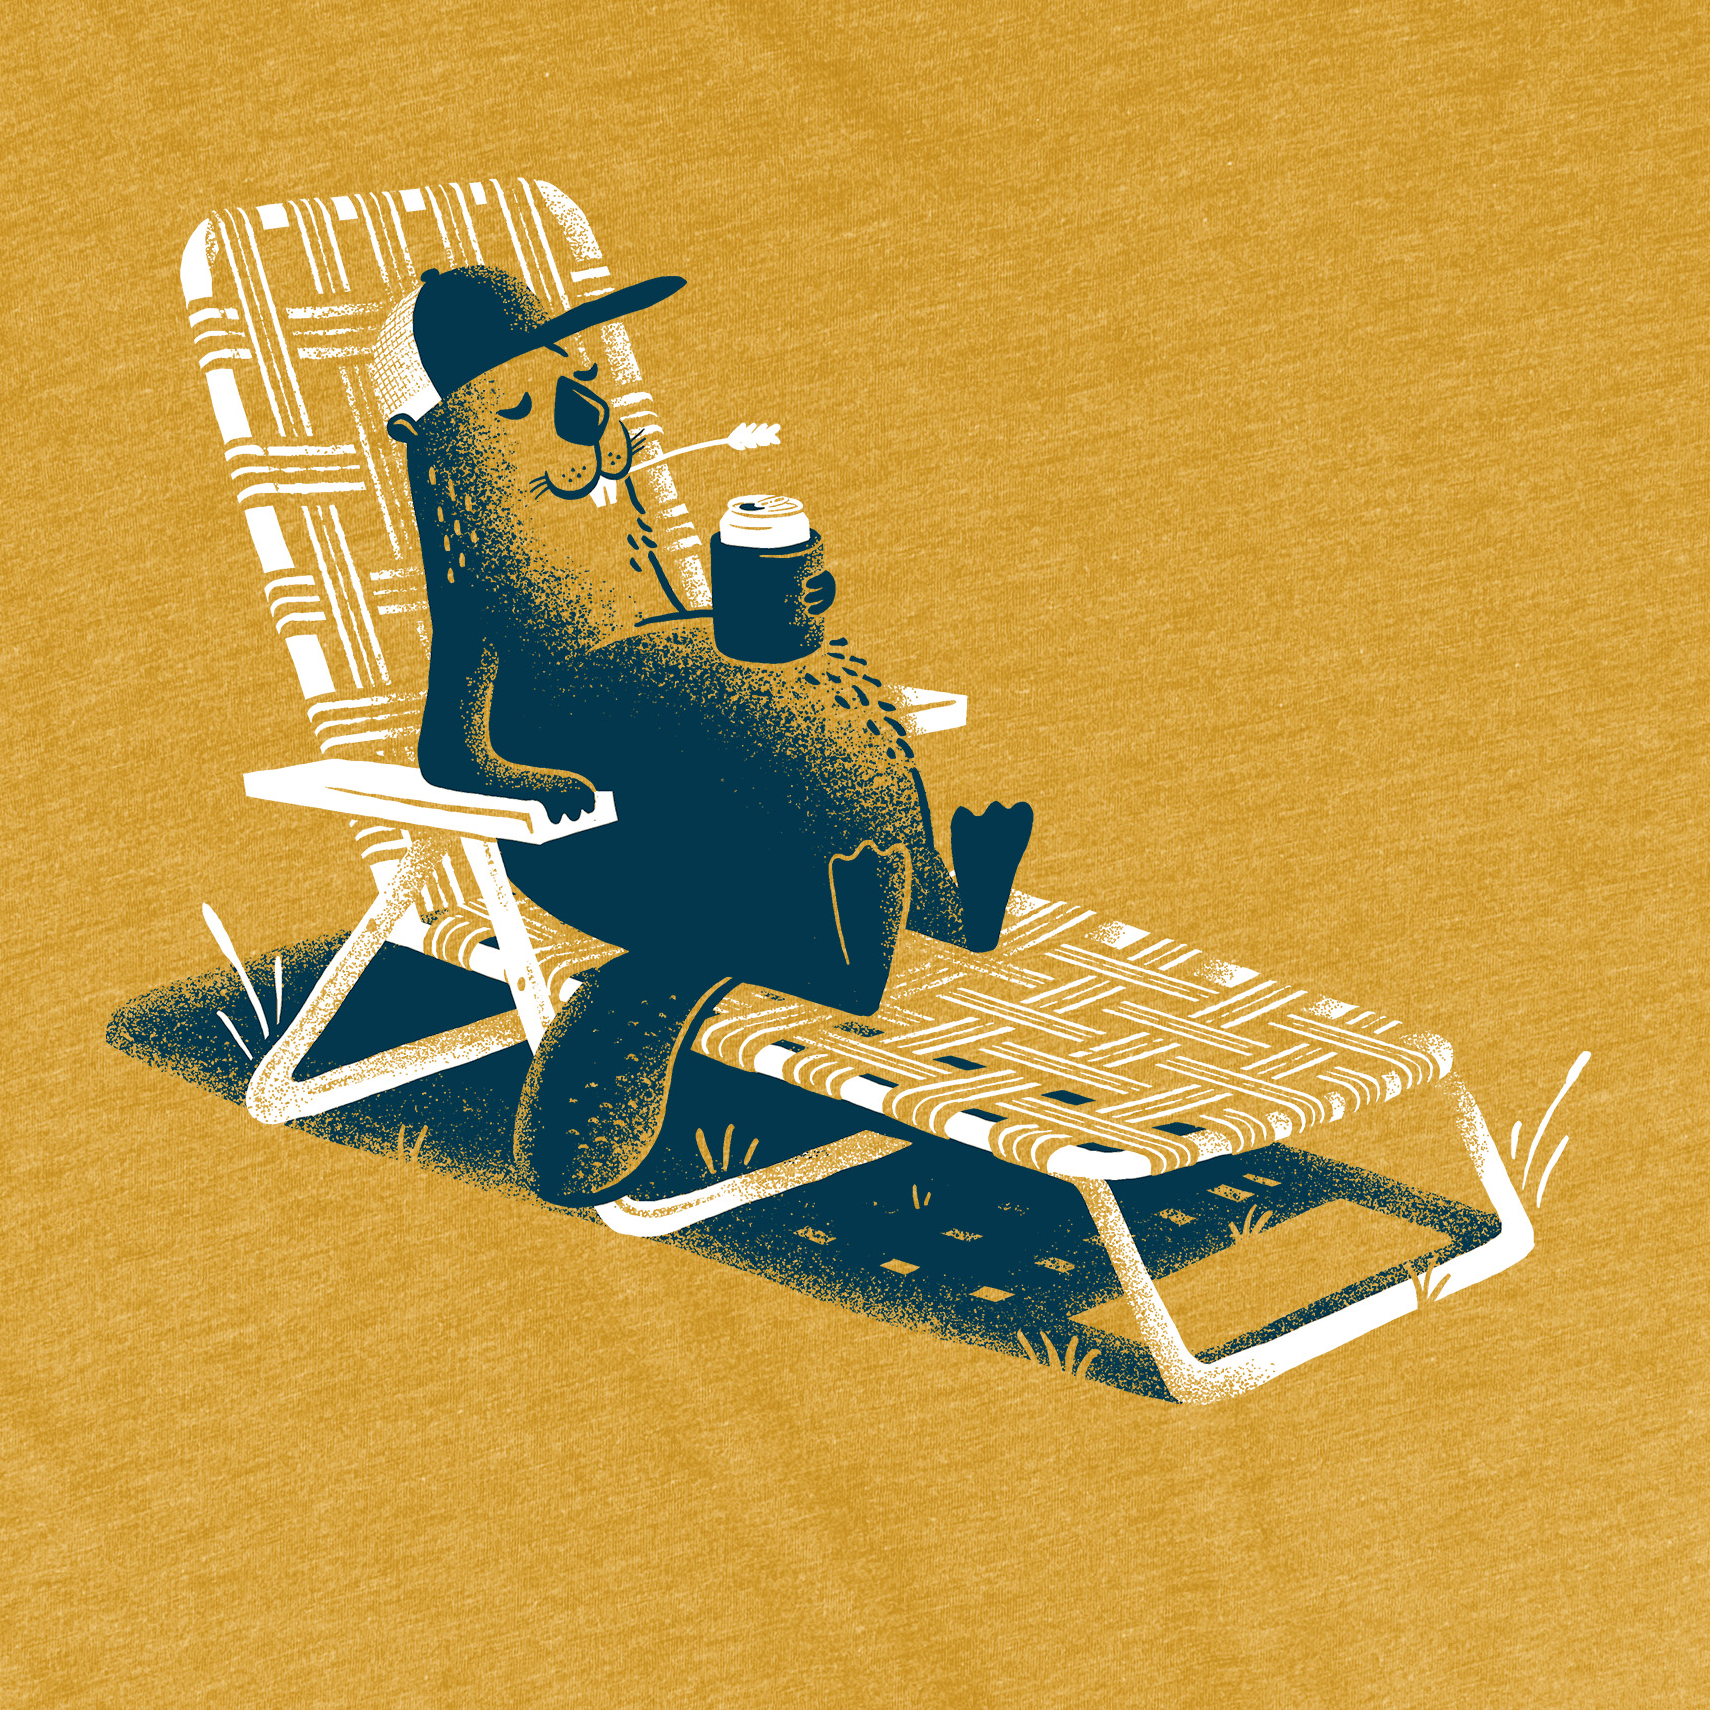 Detail of mustard yellow tee of beaver in a lawnchair drinking a beer or soda. 